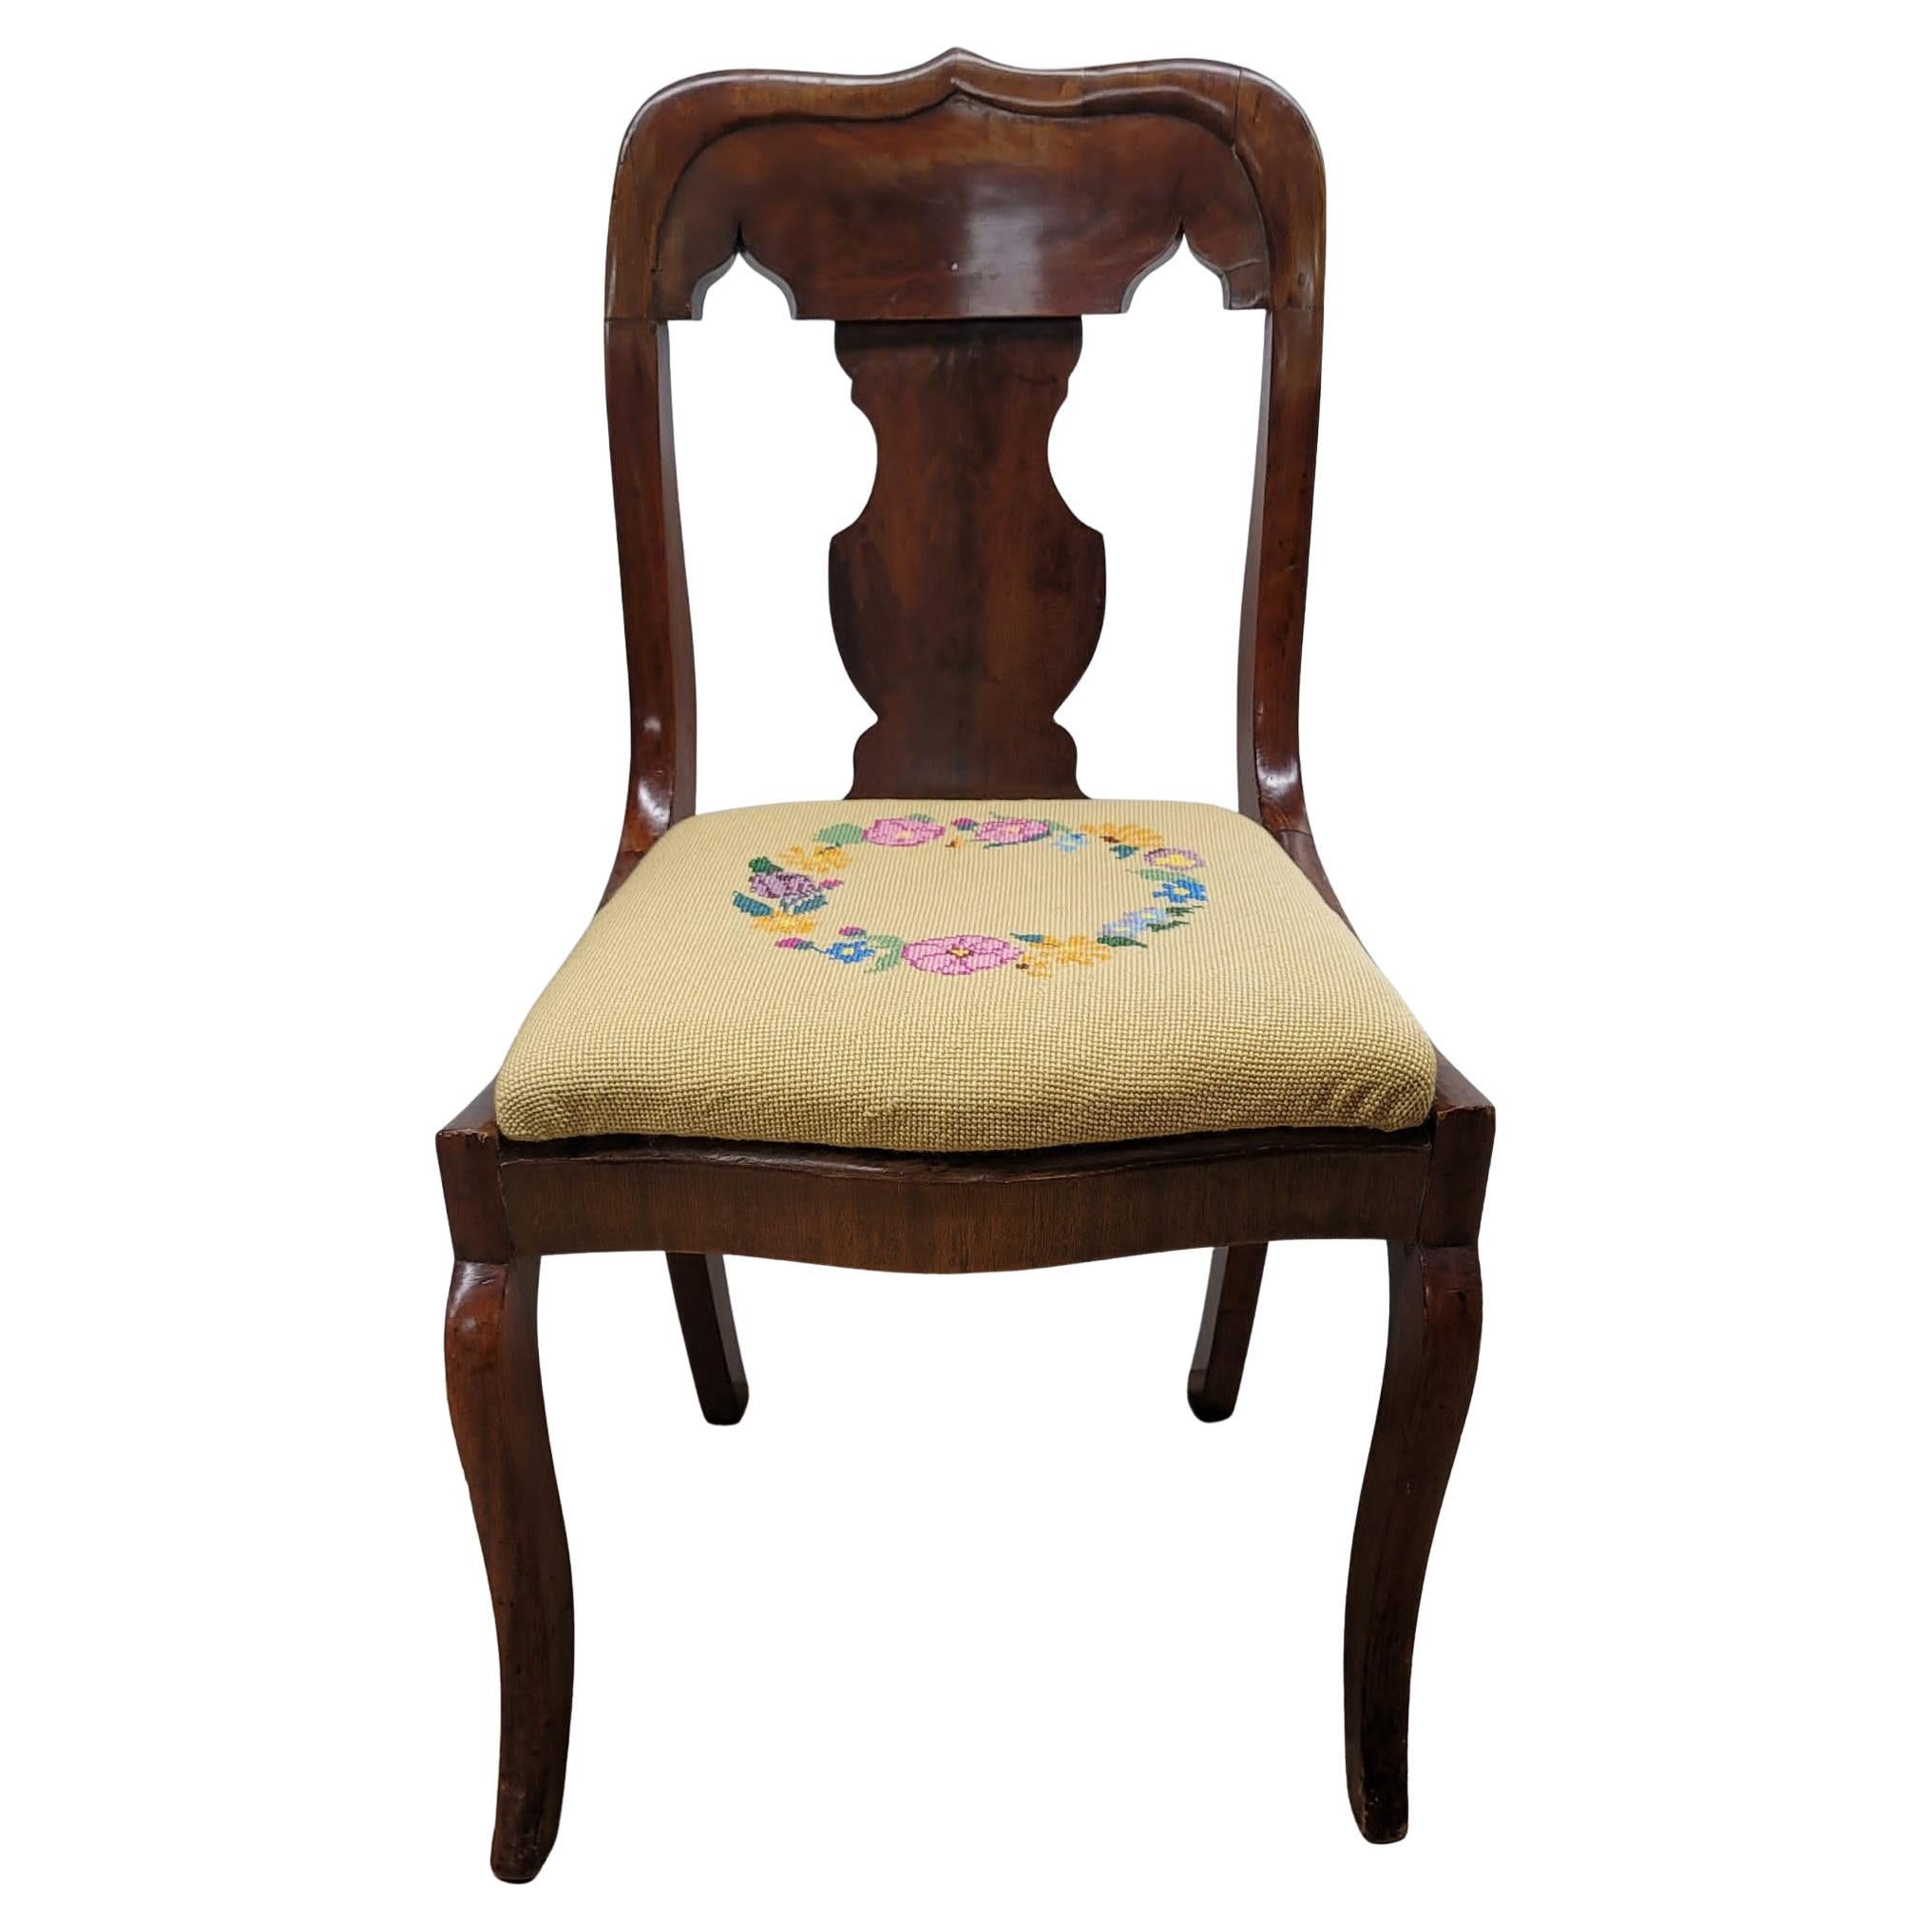 Upholstery American Empire Mahogany and Needlepoint Upholstered Chair, circa 1890s For Sale